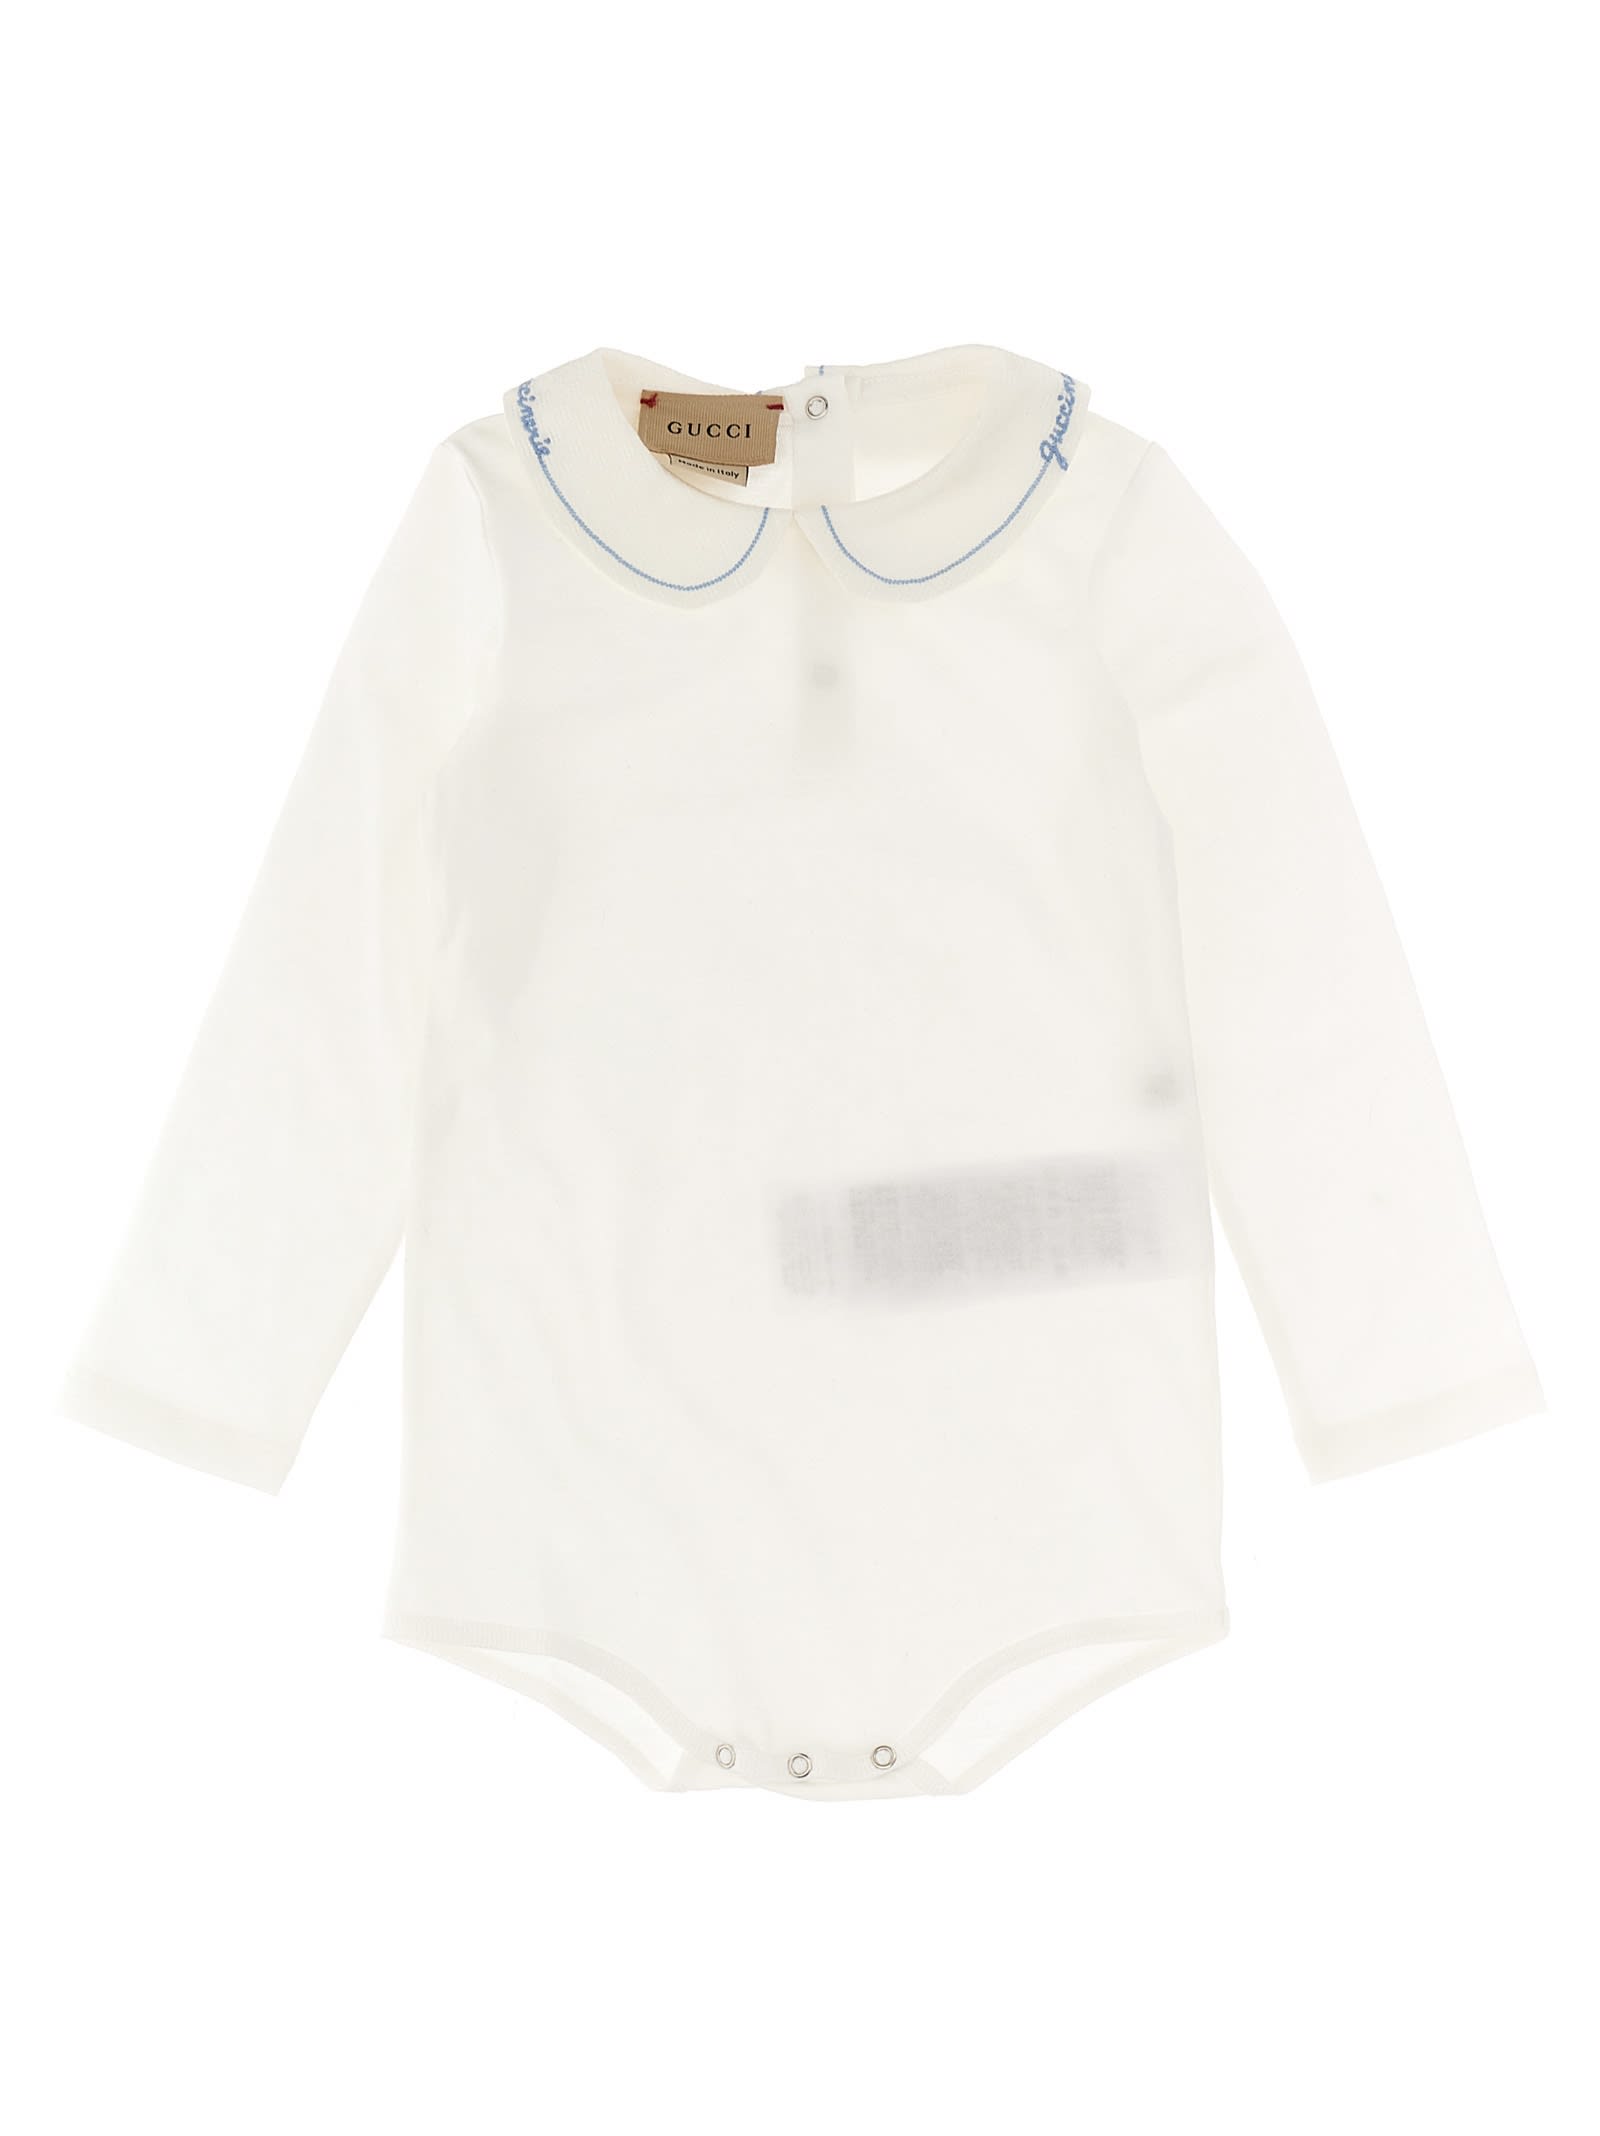 Gucci Babies' Logo Embroidered Bodysuit In White